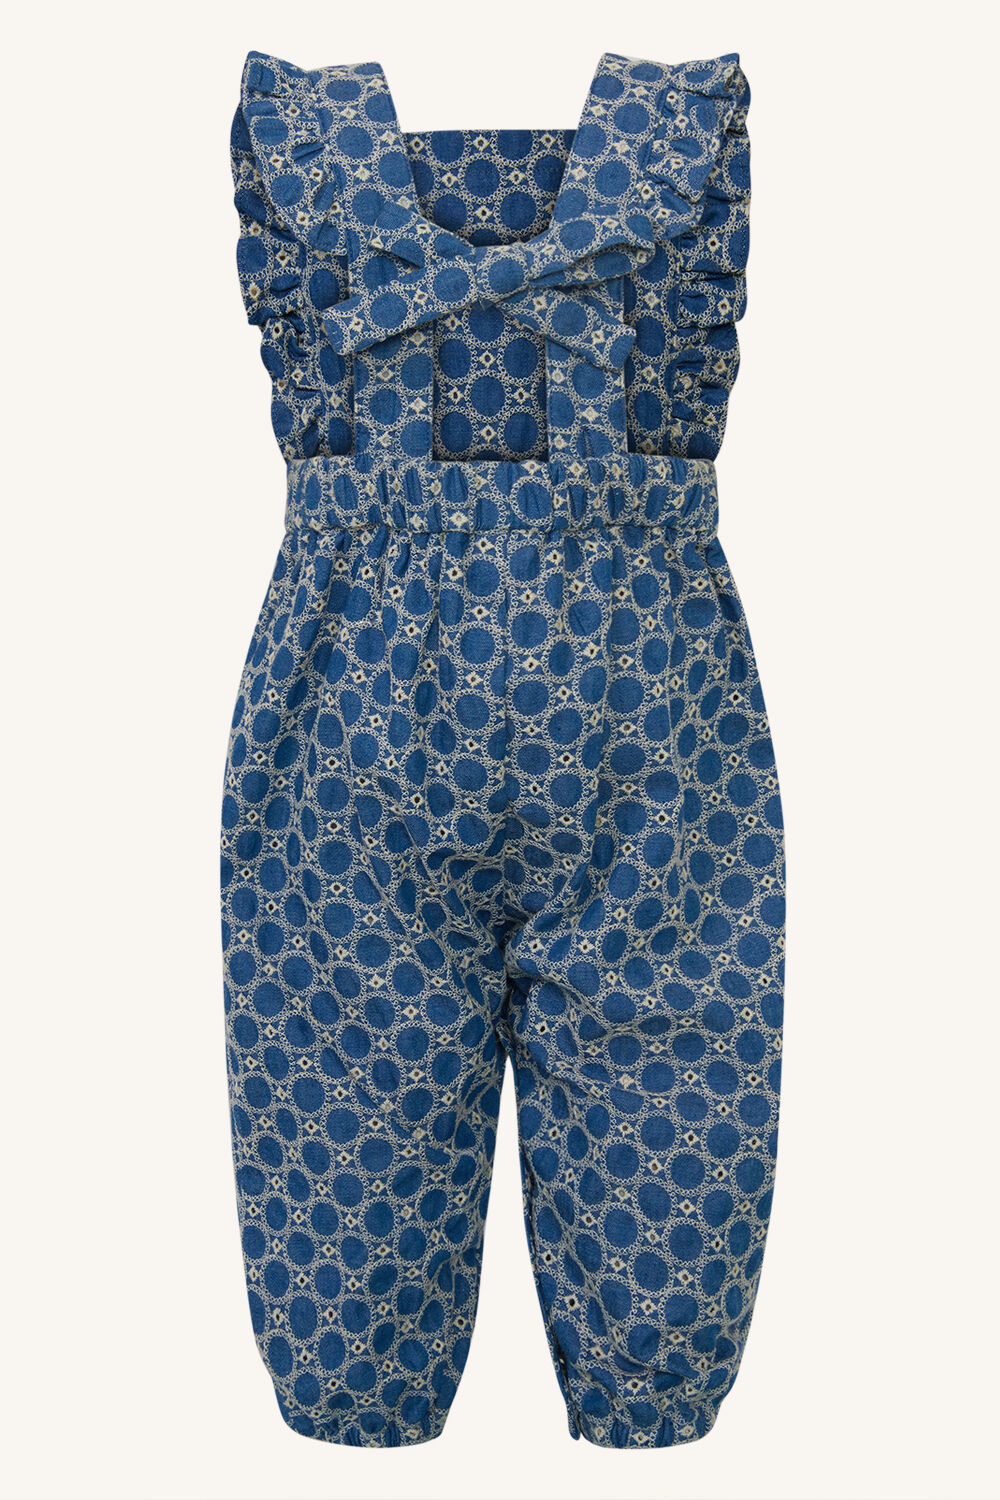 BABY GIRL ESTELLE CHAMBRAY OVERALL in colour CHAMBRAY BLUE